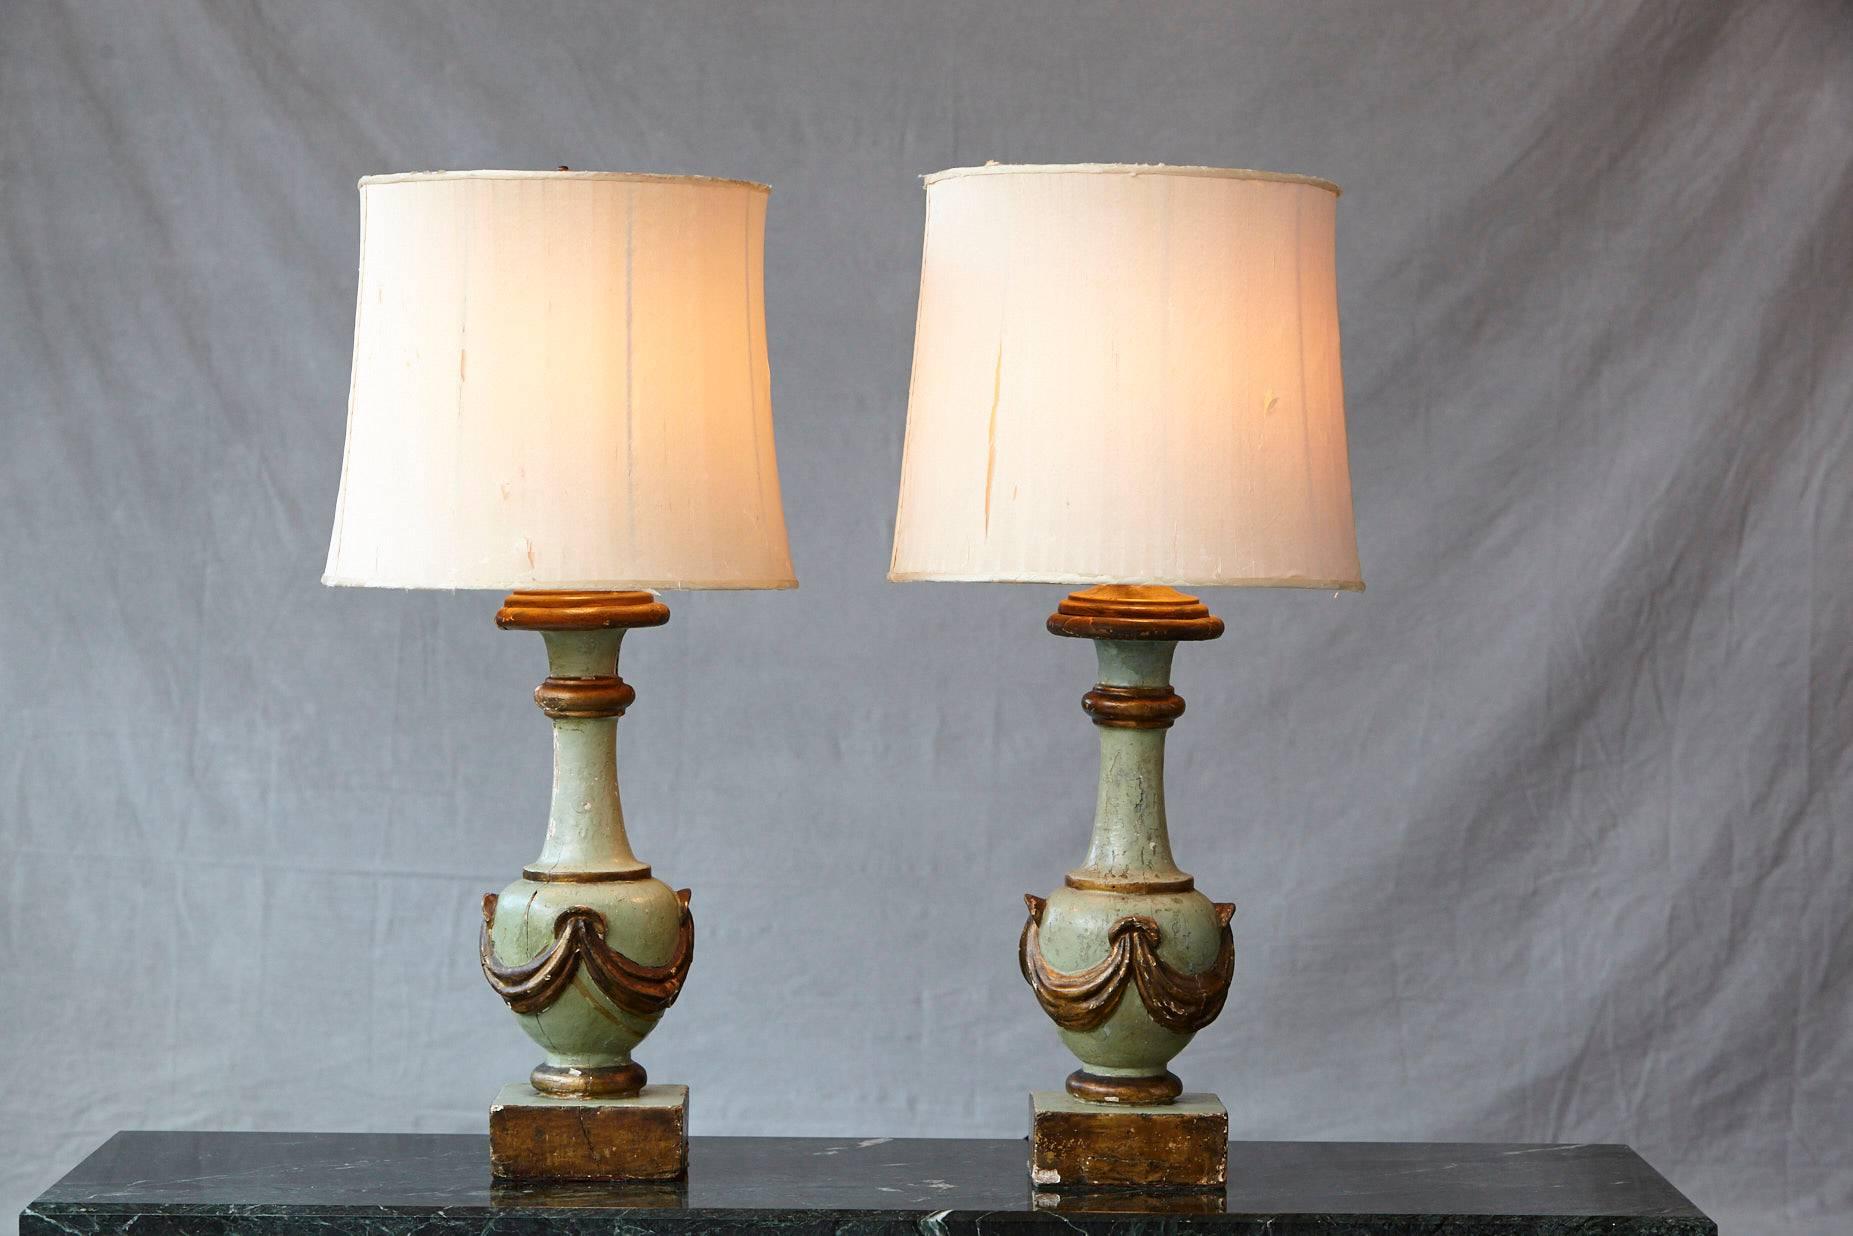 Exceptional pair of antique Italian hand-painted and hand-carved wood variform table lamps, each with an aqua and guilt finish. The draped bottle forms on squared bases. custom-made silk shades.

The lamps and shades are as is, with splits in the